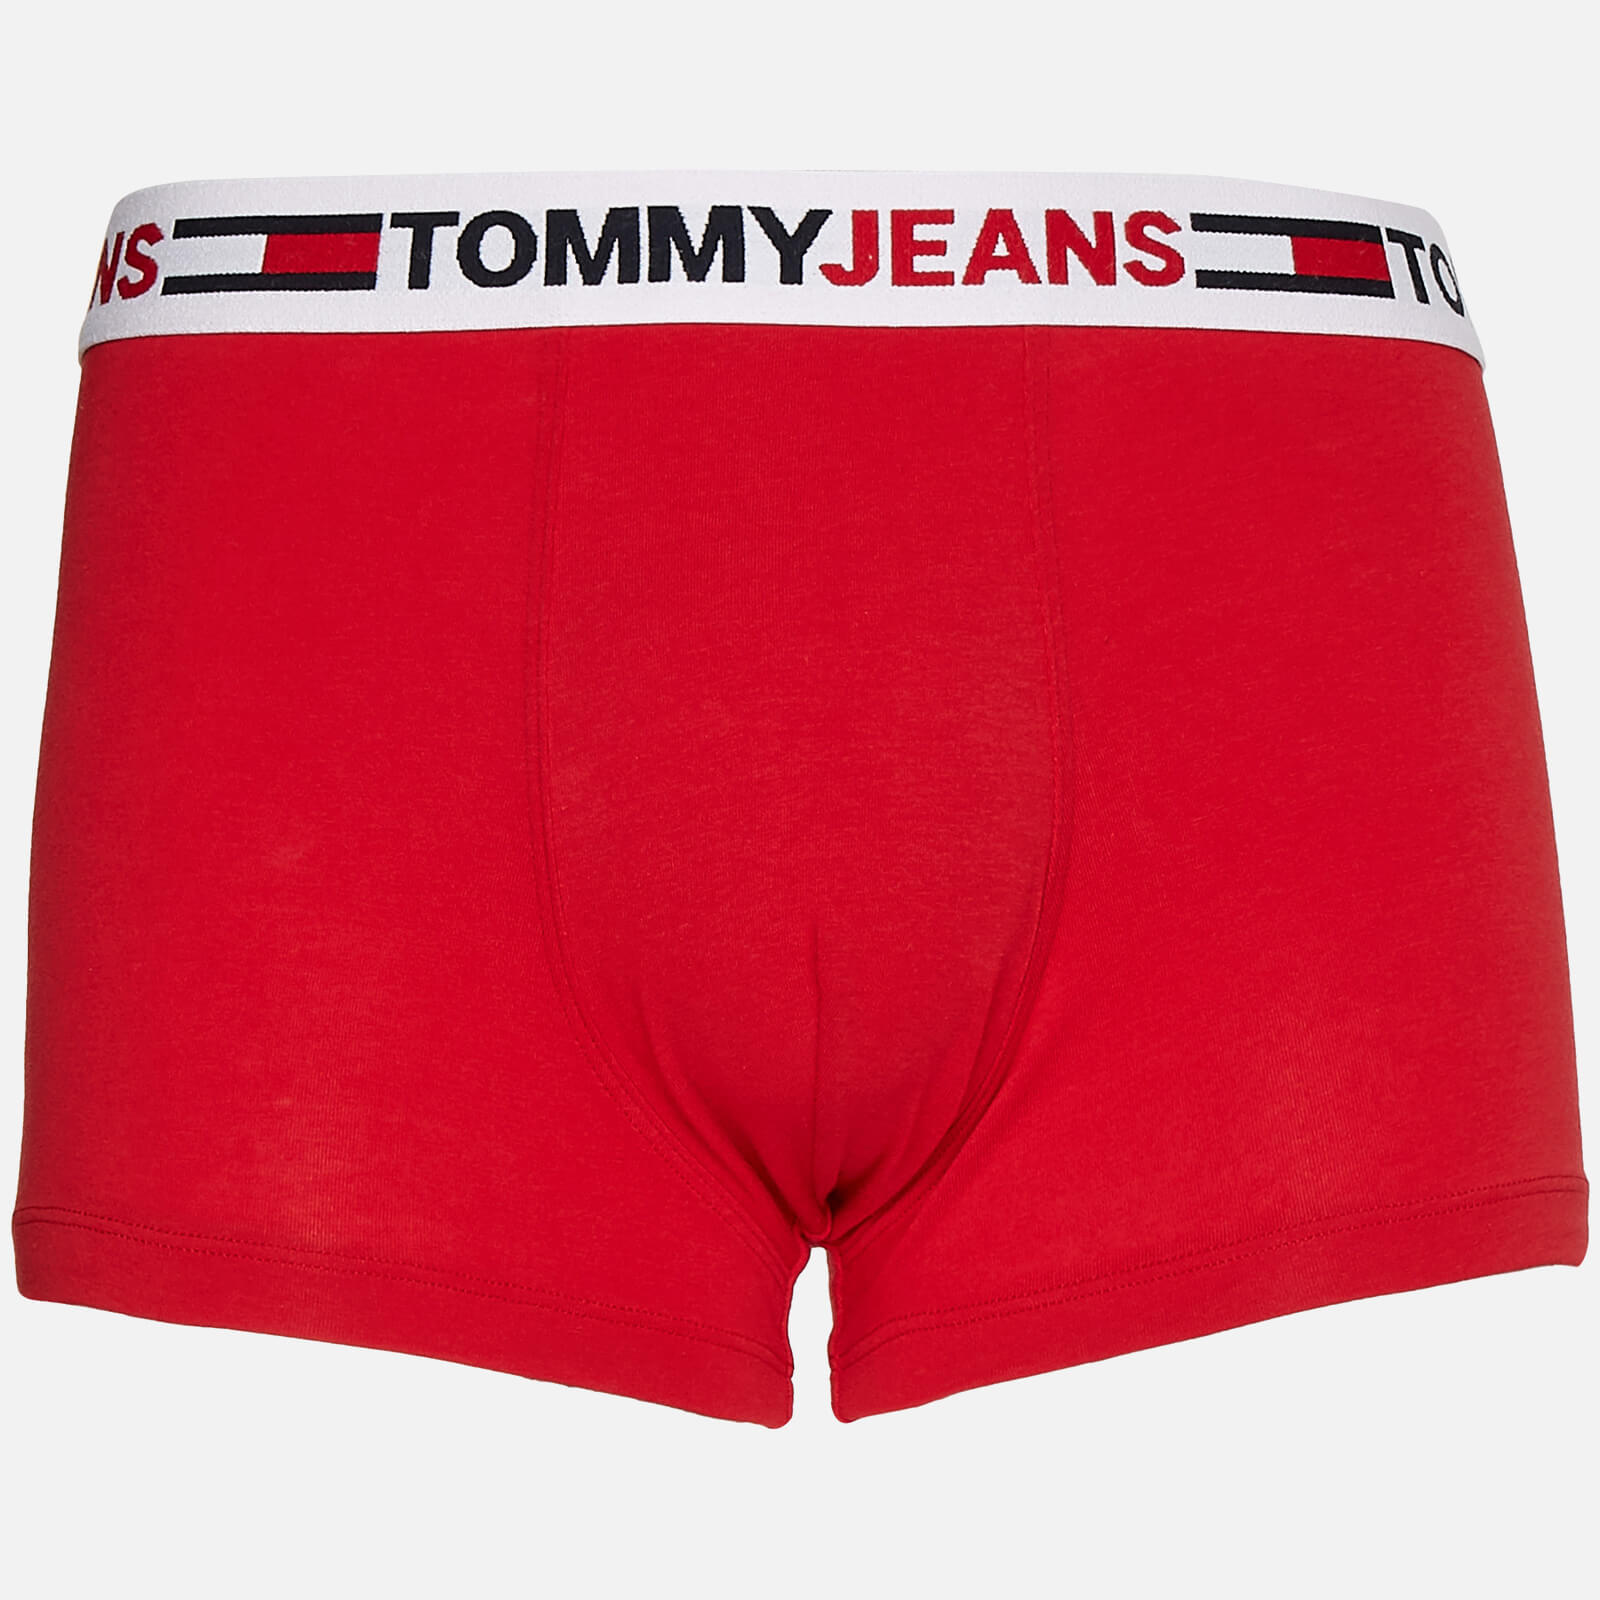 Tommy Hilfiger Men's Contrast Waistband Trunks - Primary Red - XL